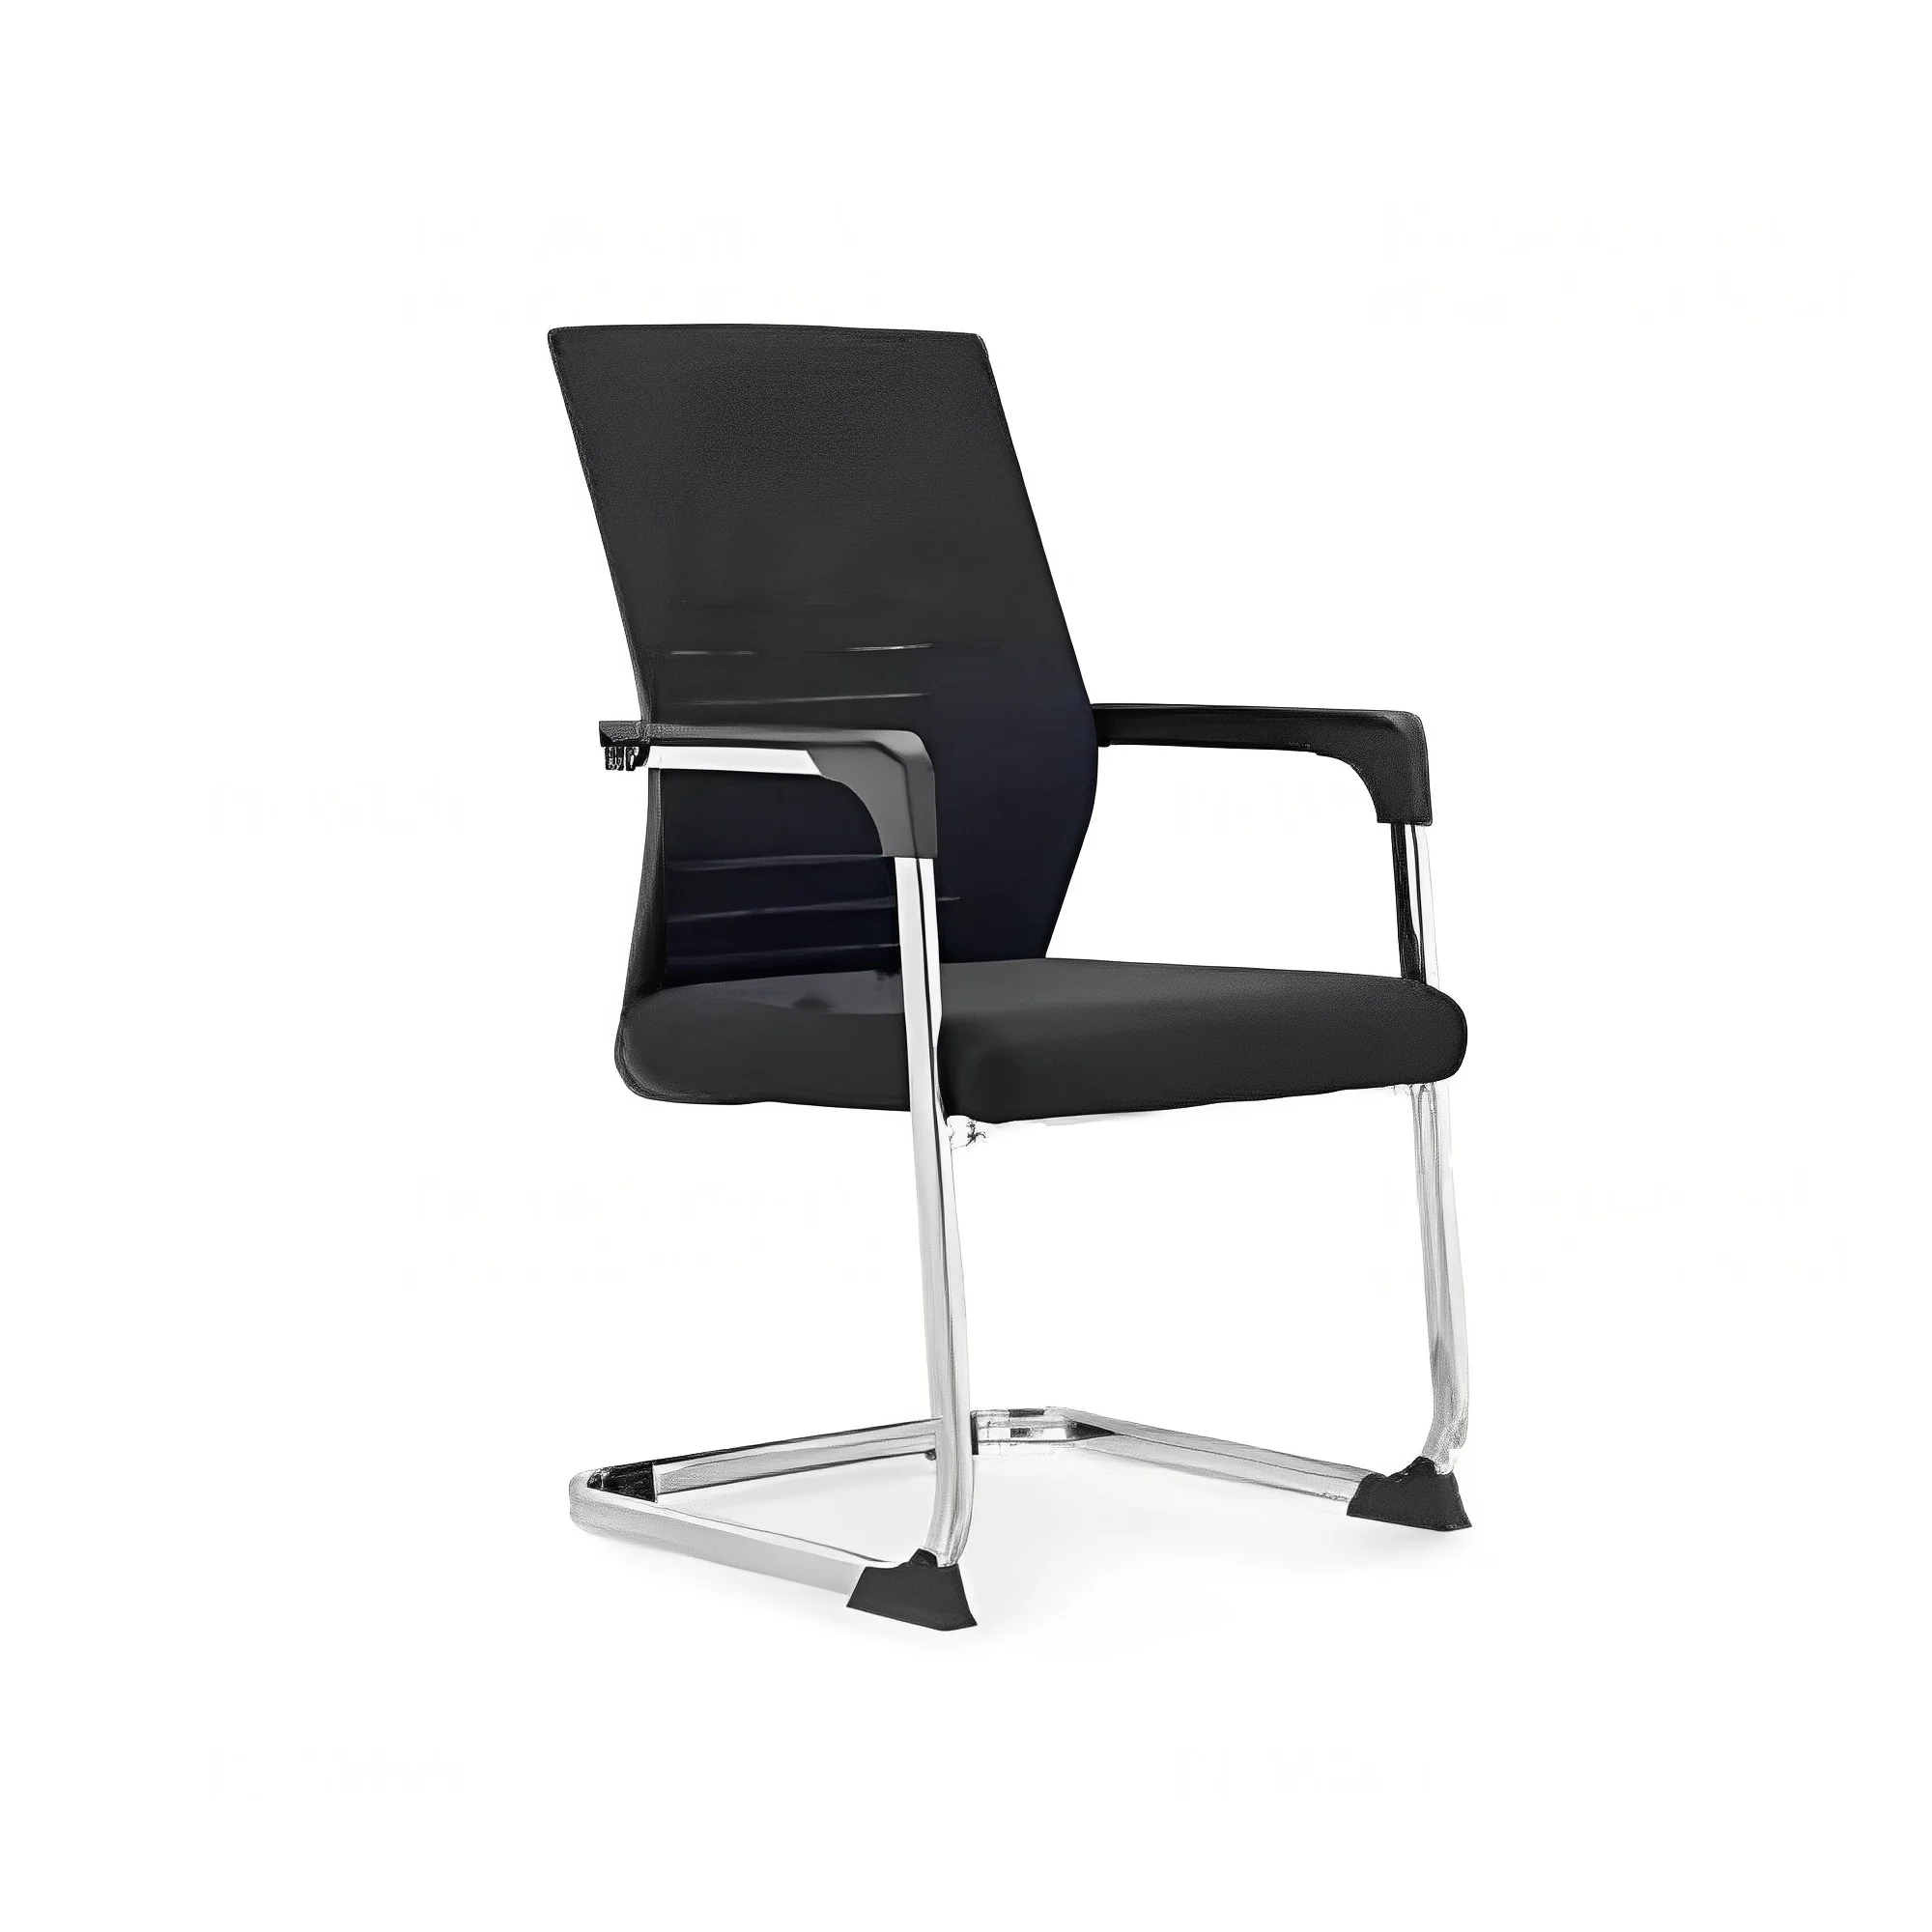 Office Visitor Chair (OG-CH-B910)